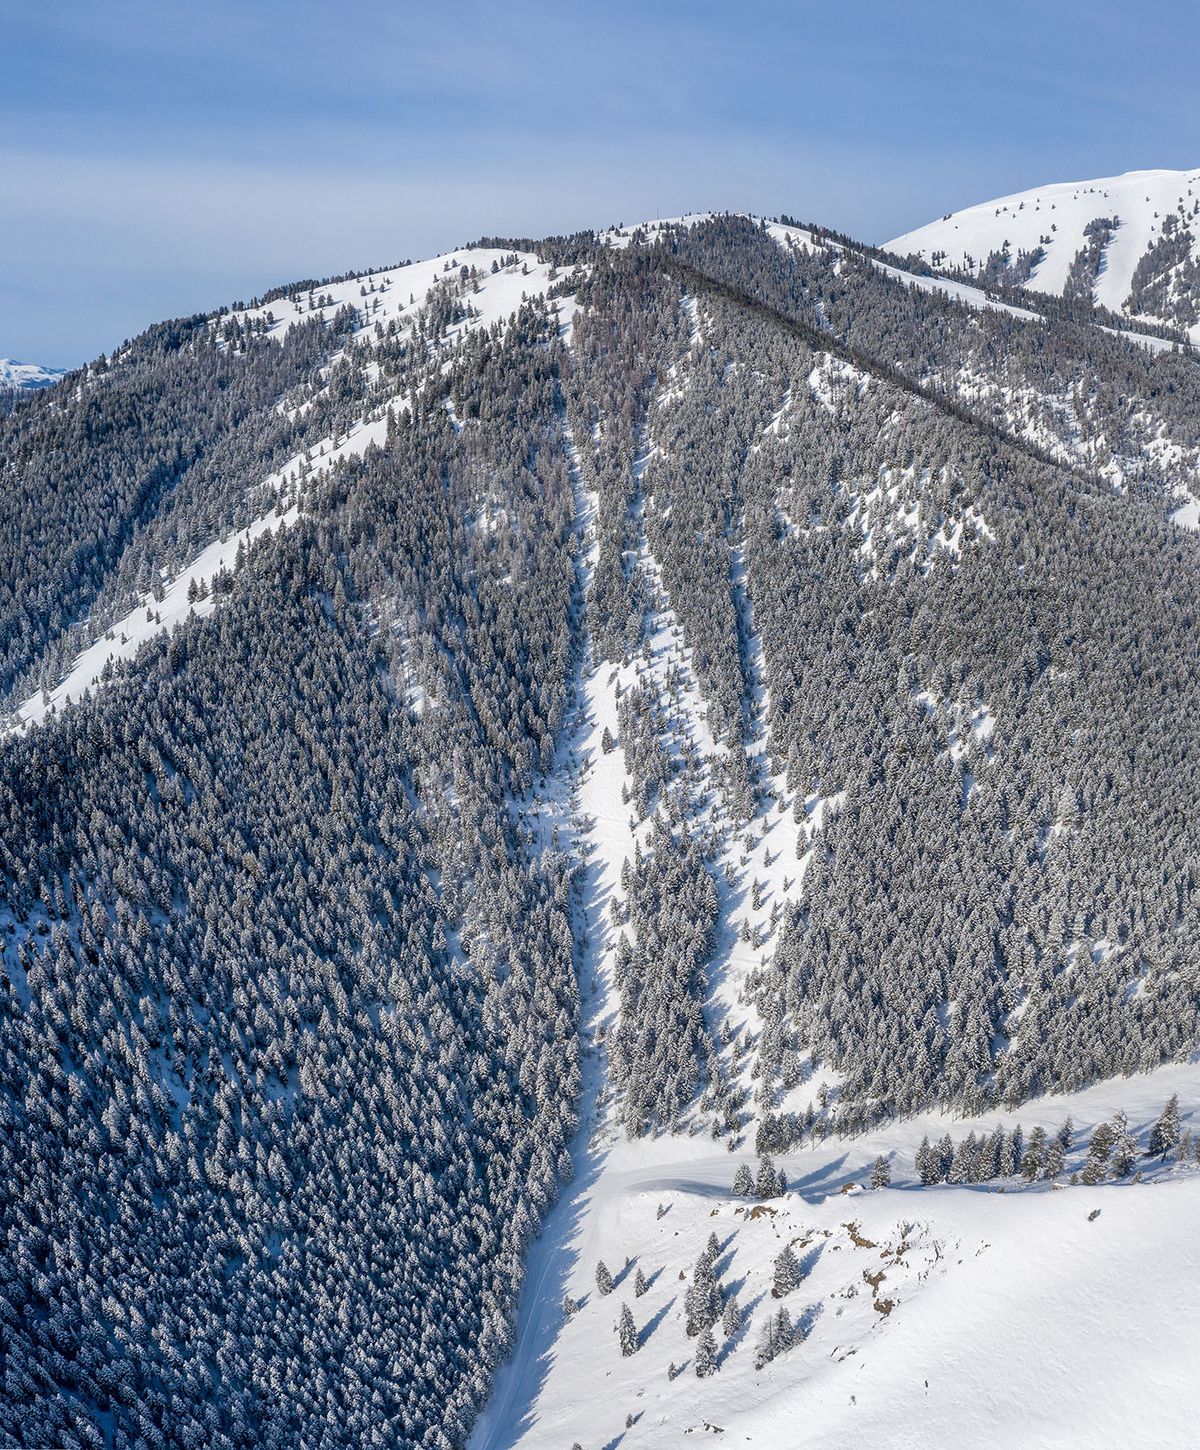 SUN VALLEY, Idaho (Oct. 15, 2020) — With the Bald Mountain Expansion complete, Sun Valley – America